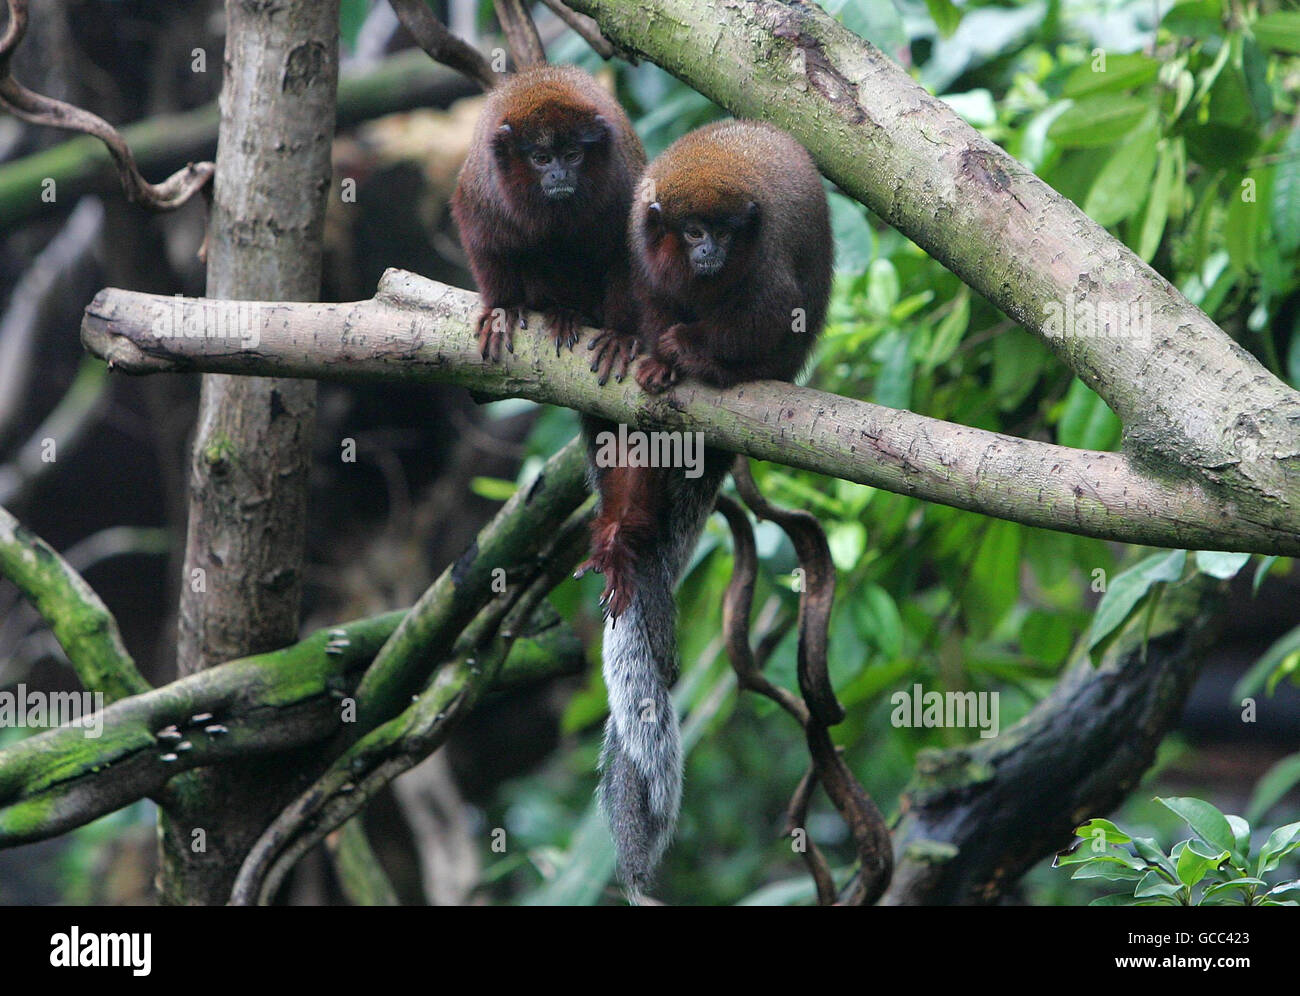 A pair of red titi monkeys sit on a branch with their tails entwined in Rainforest Life at ZSL (Zoological Society of London) London Zoo, a living rainforest, built inside a giant bio-dome, which will be a giant breeding facility for free-roaming monkeys, sloths, tree anteaters and birds. Stock Photo